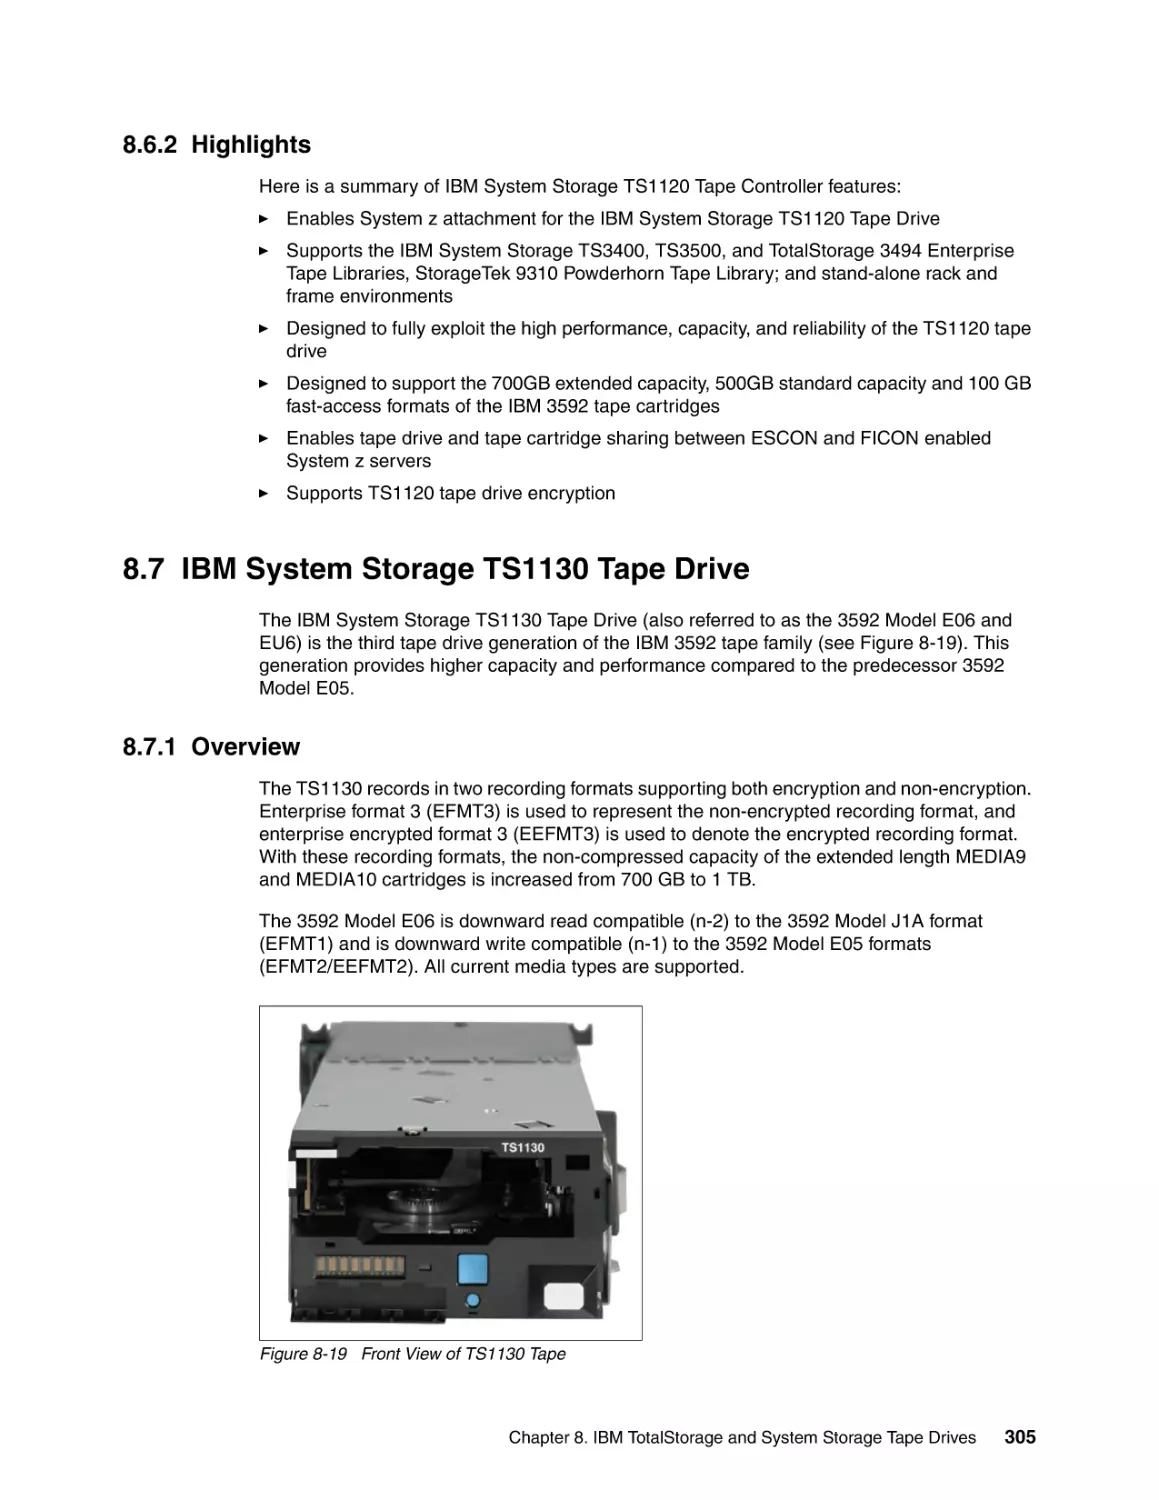 8.6.2 Highlights
8.7 IBM System Storage TS1130 Tape Drive
8.7.1 Overview